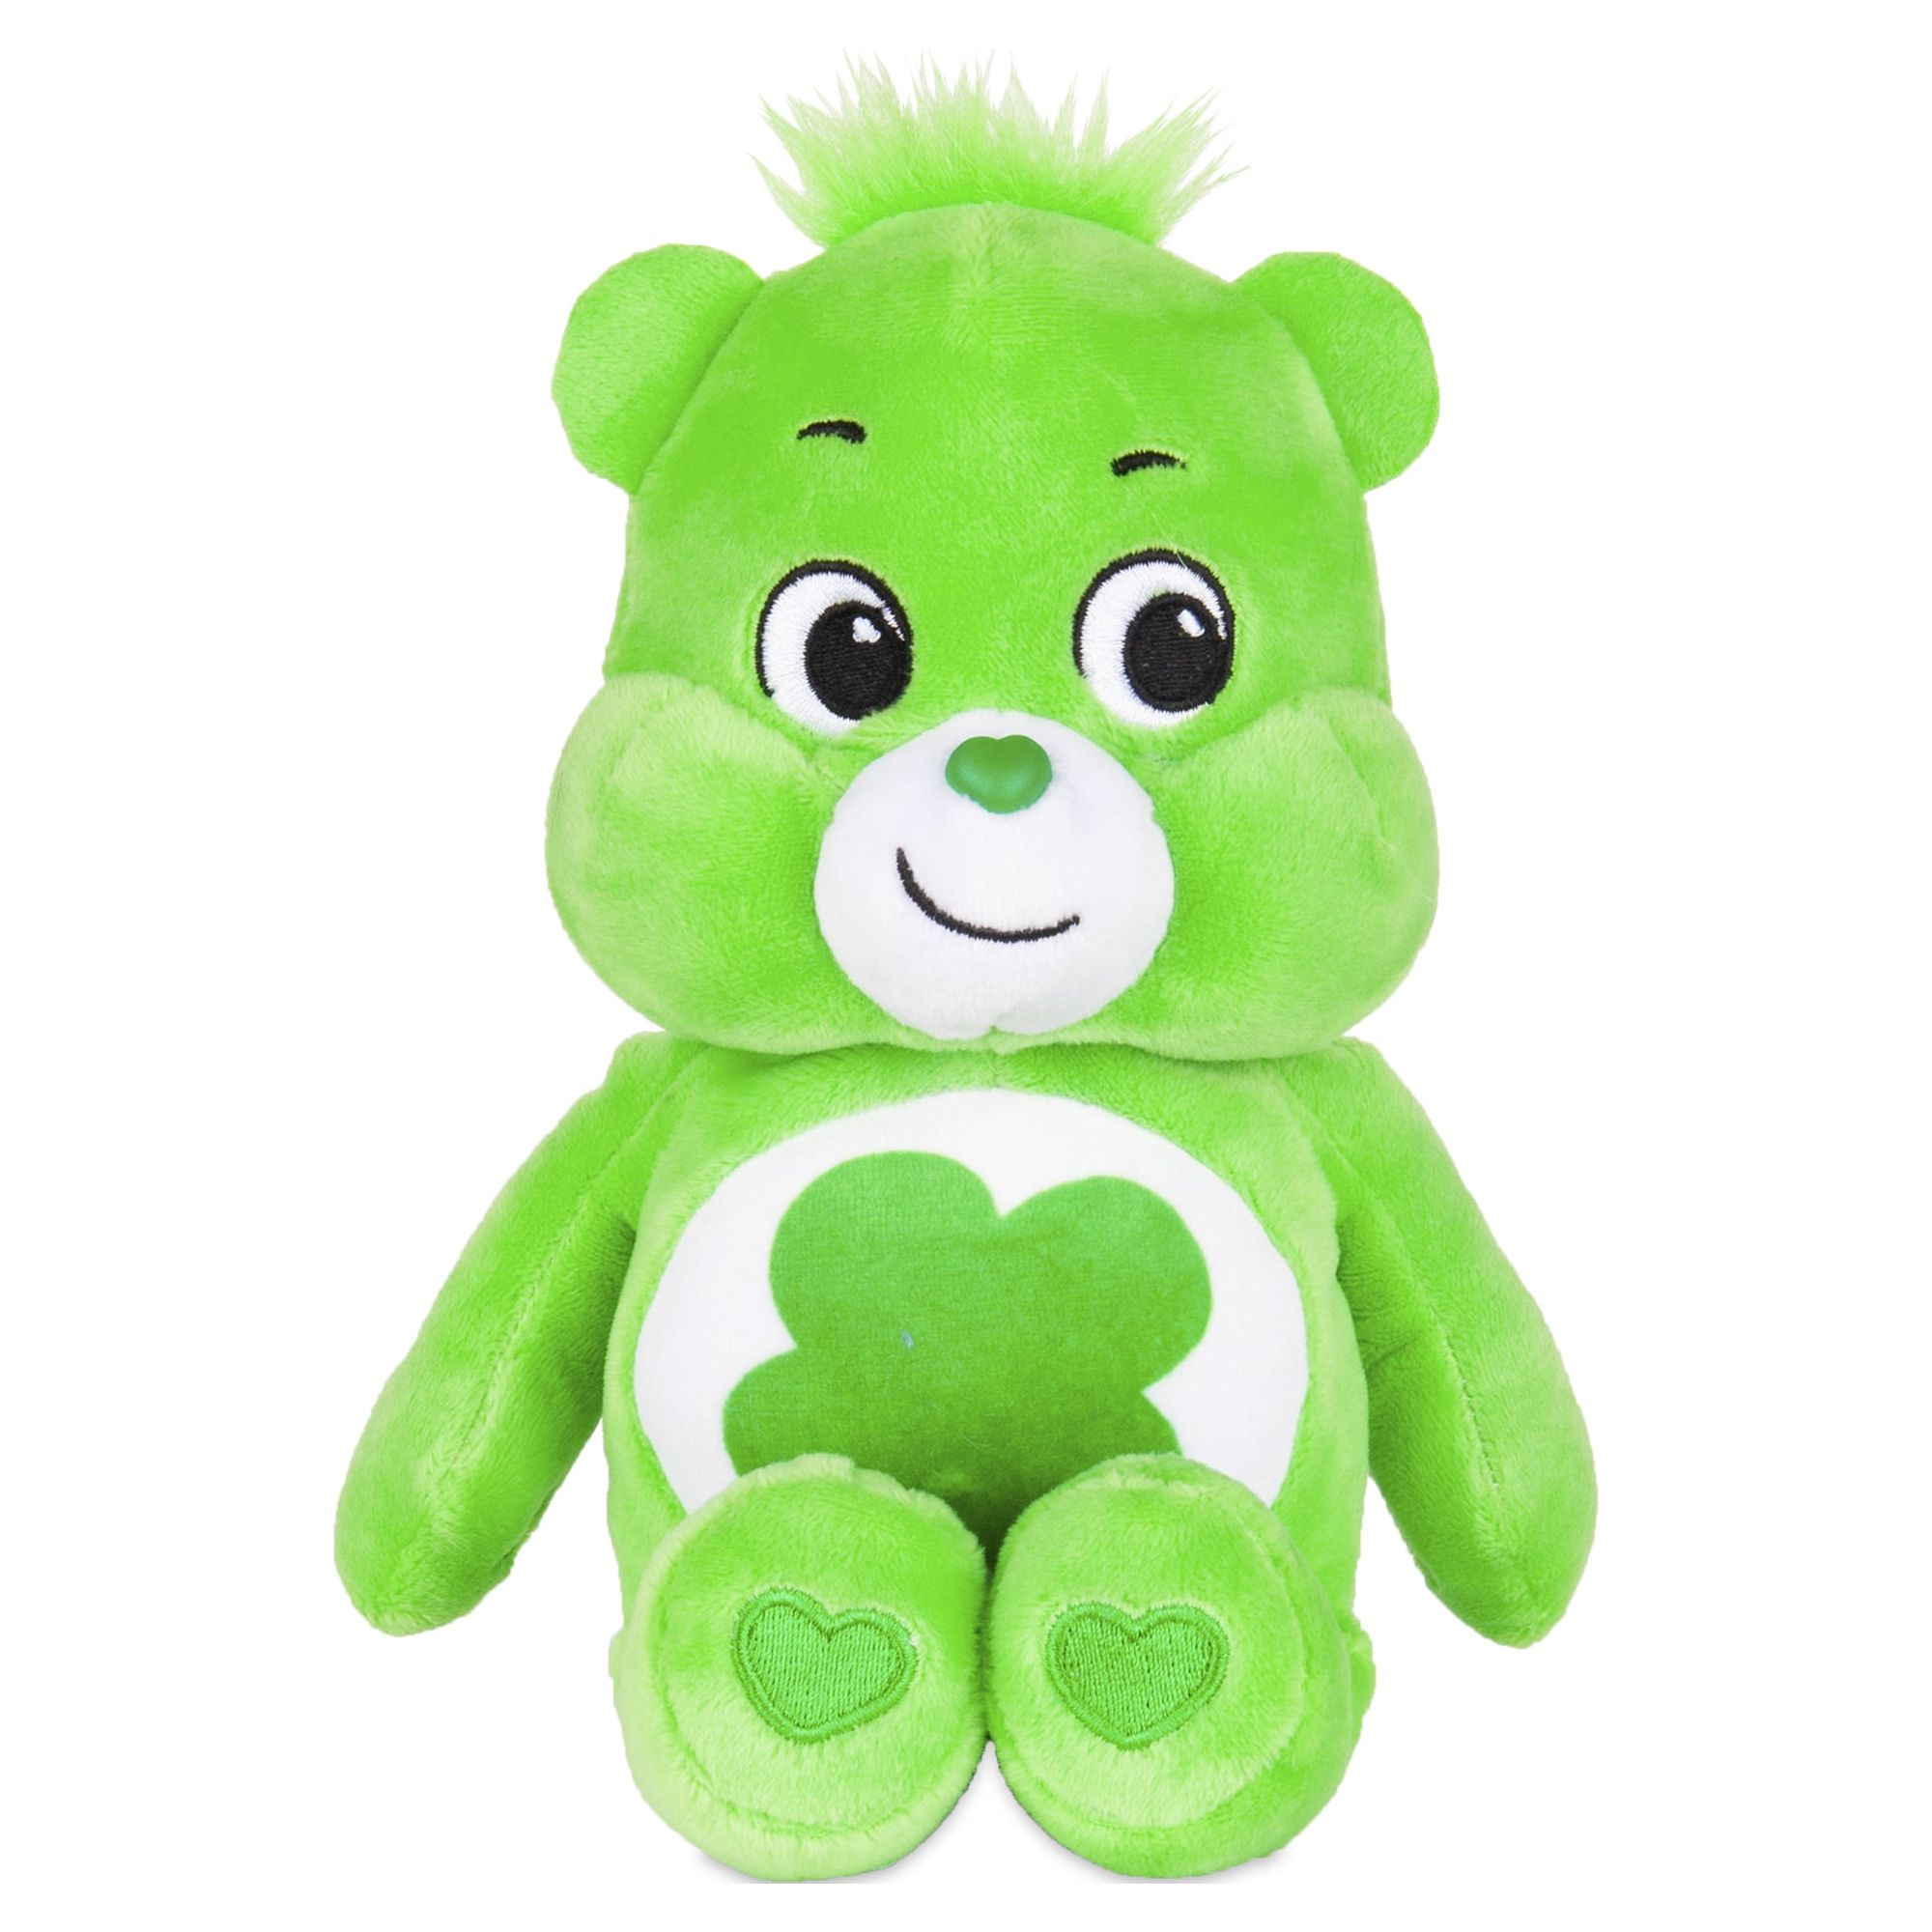 Care Bears - 9" Bean Plush - Special Collector Set - Exclusive Harmony Bear Included! - image 5 of 9